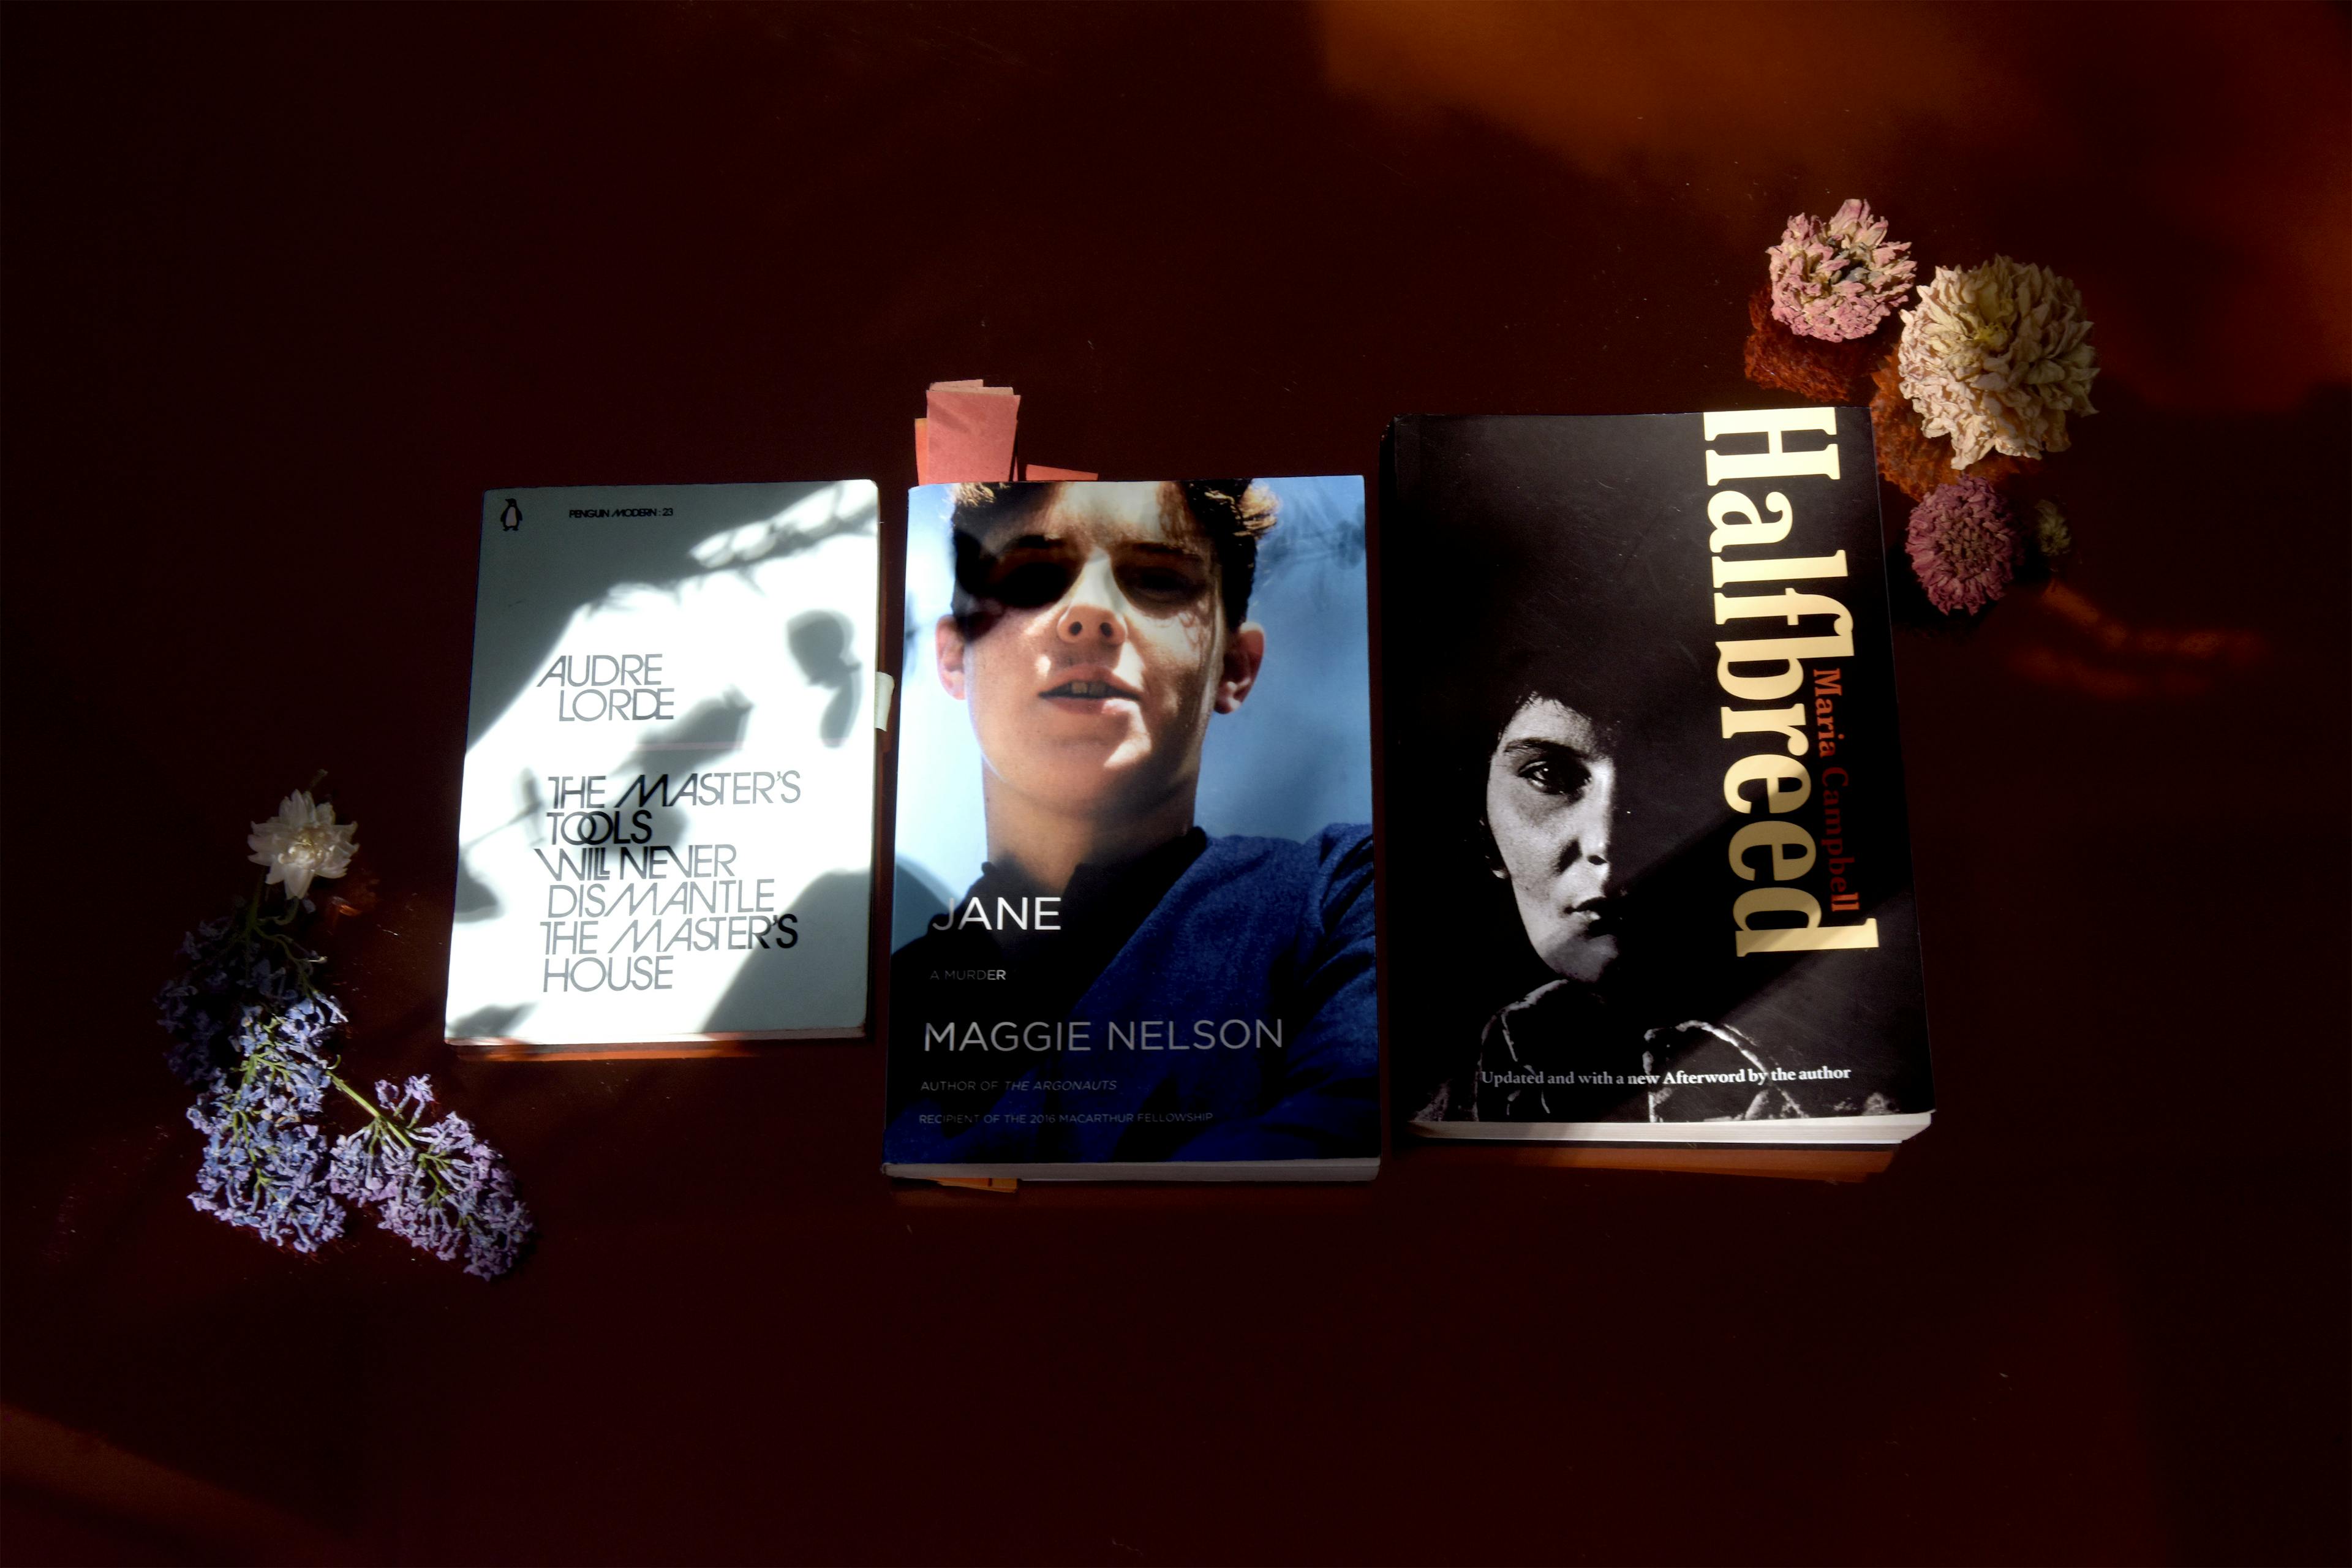 Three books are placed on a red flat surface. From the left to the right, Audre Lorde’s Poetry is Not a Luxury, Maggie Nelson’s Jane: A Murder, and Maria Campbell’s Halfbreed. 